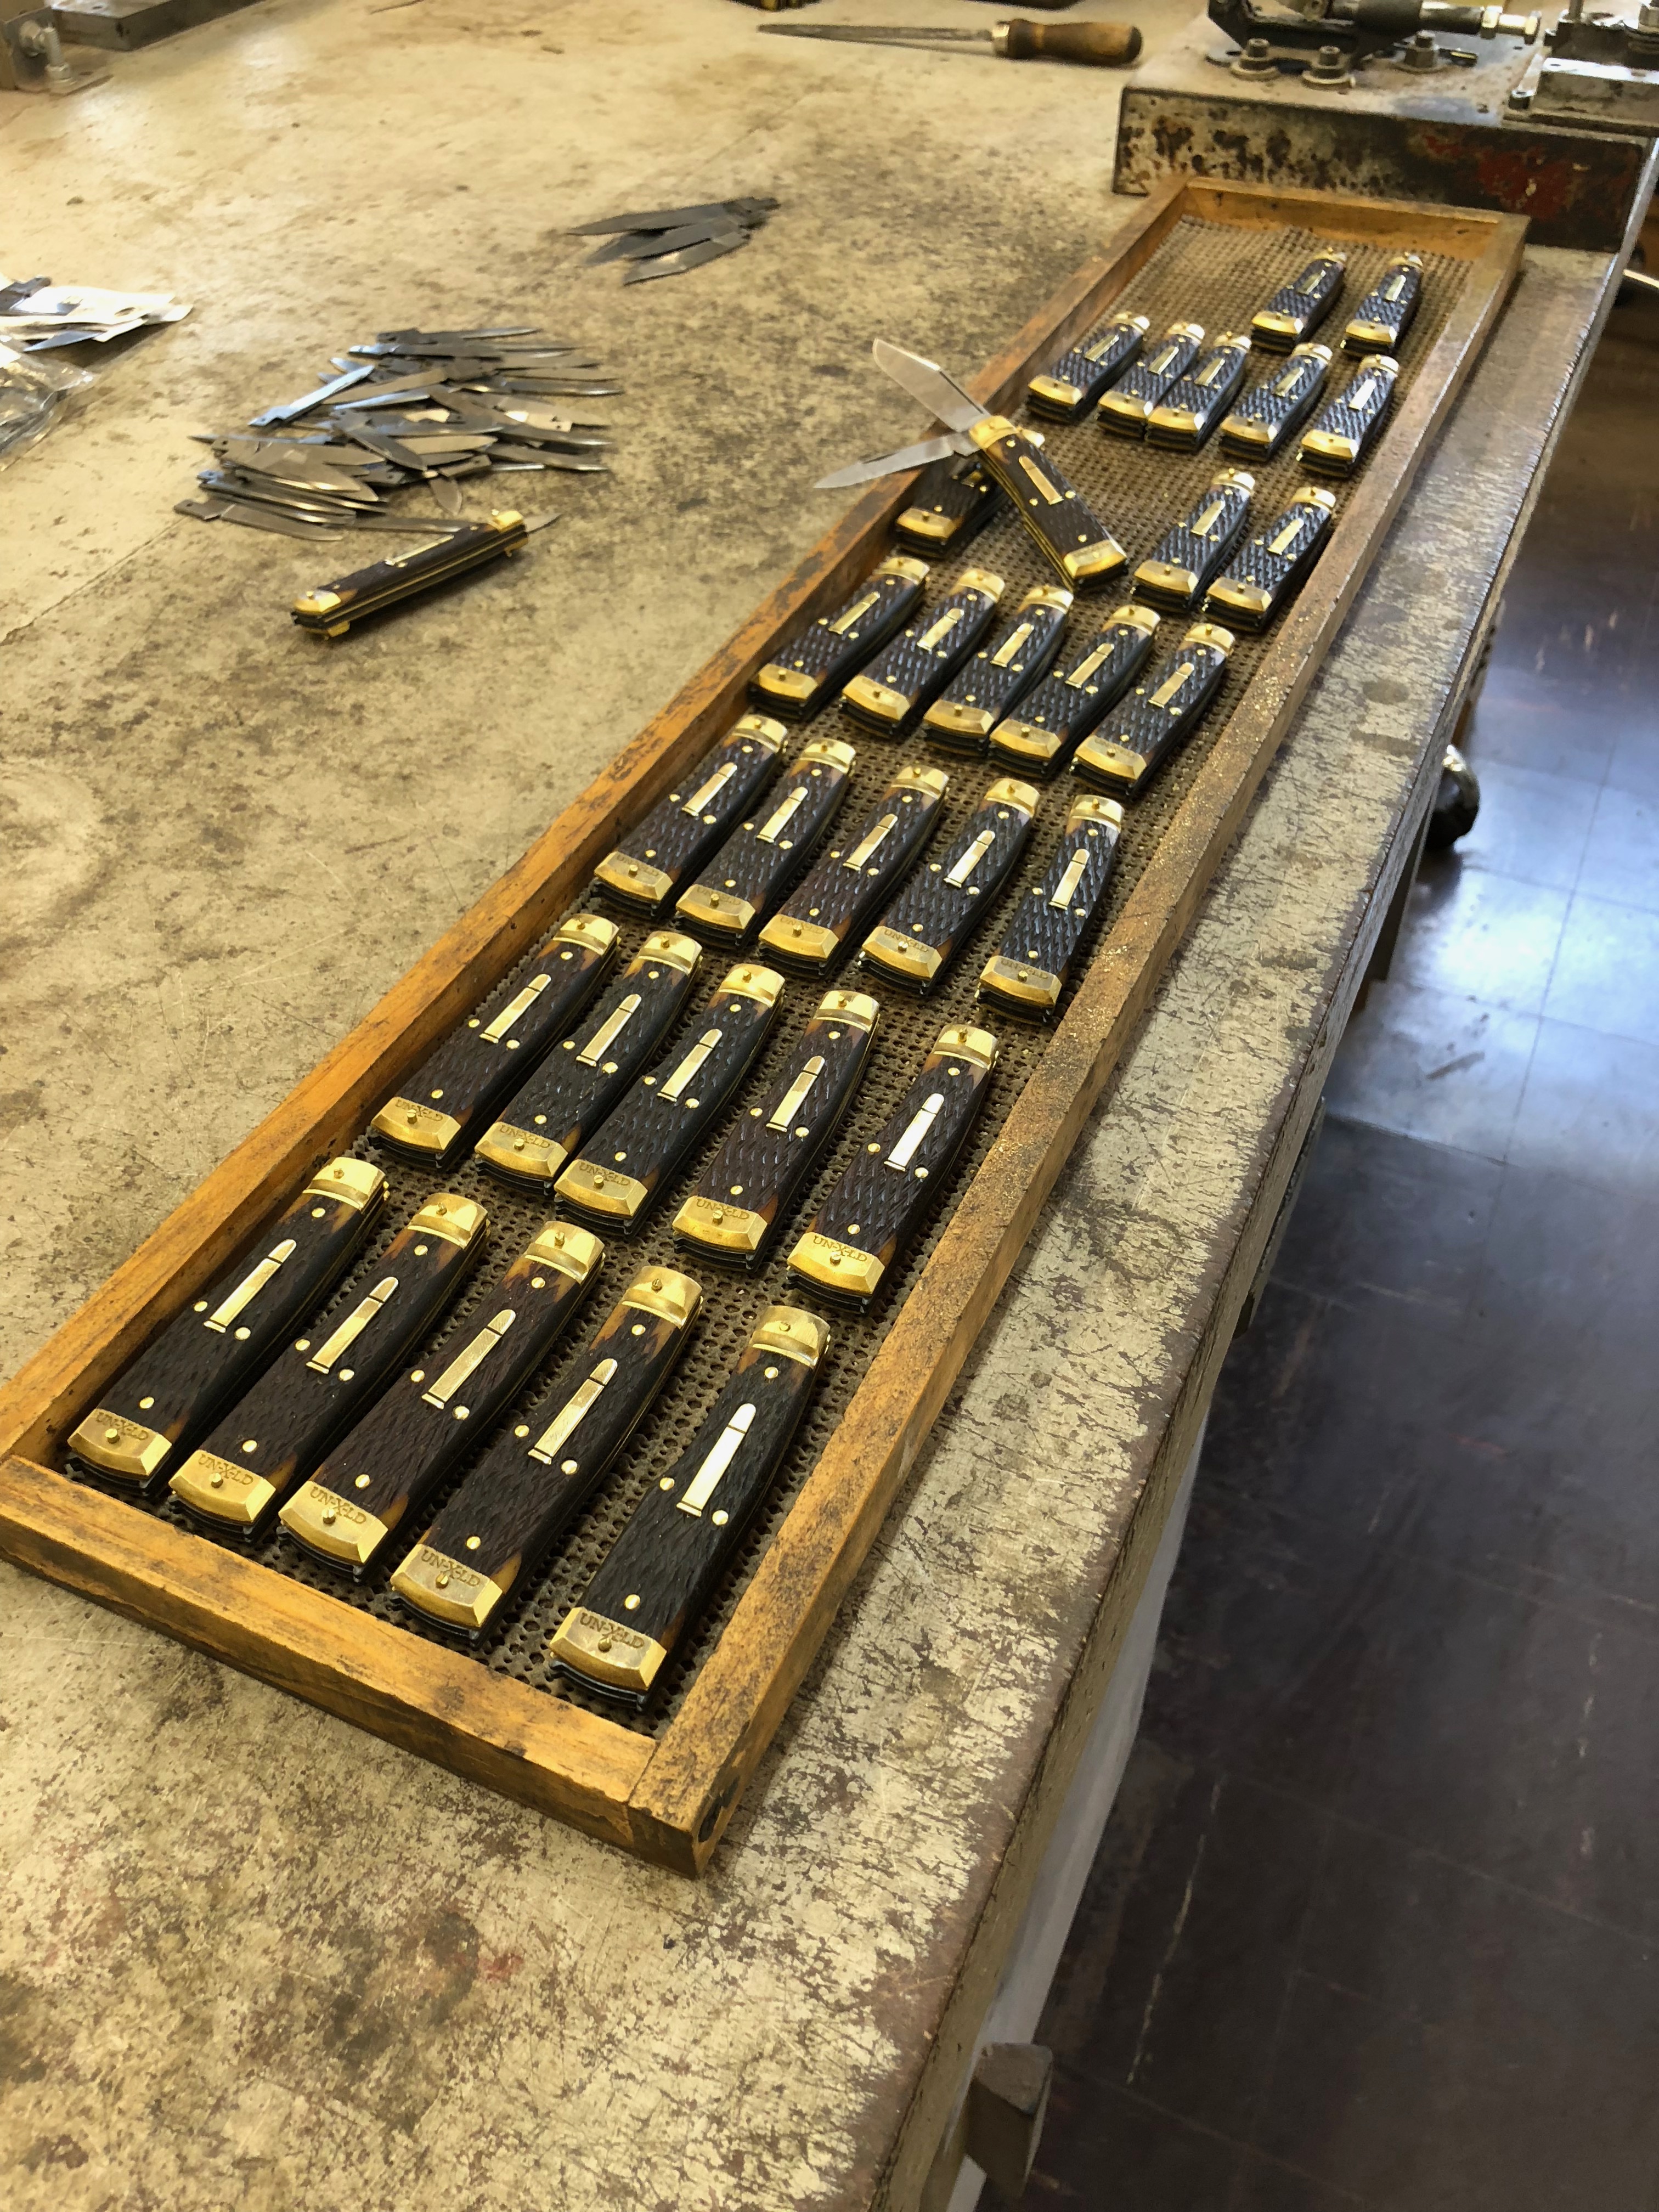 Knives in assembly